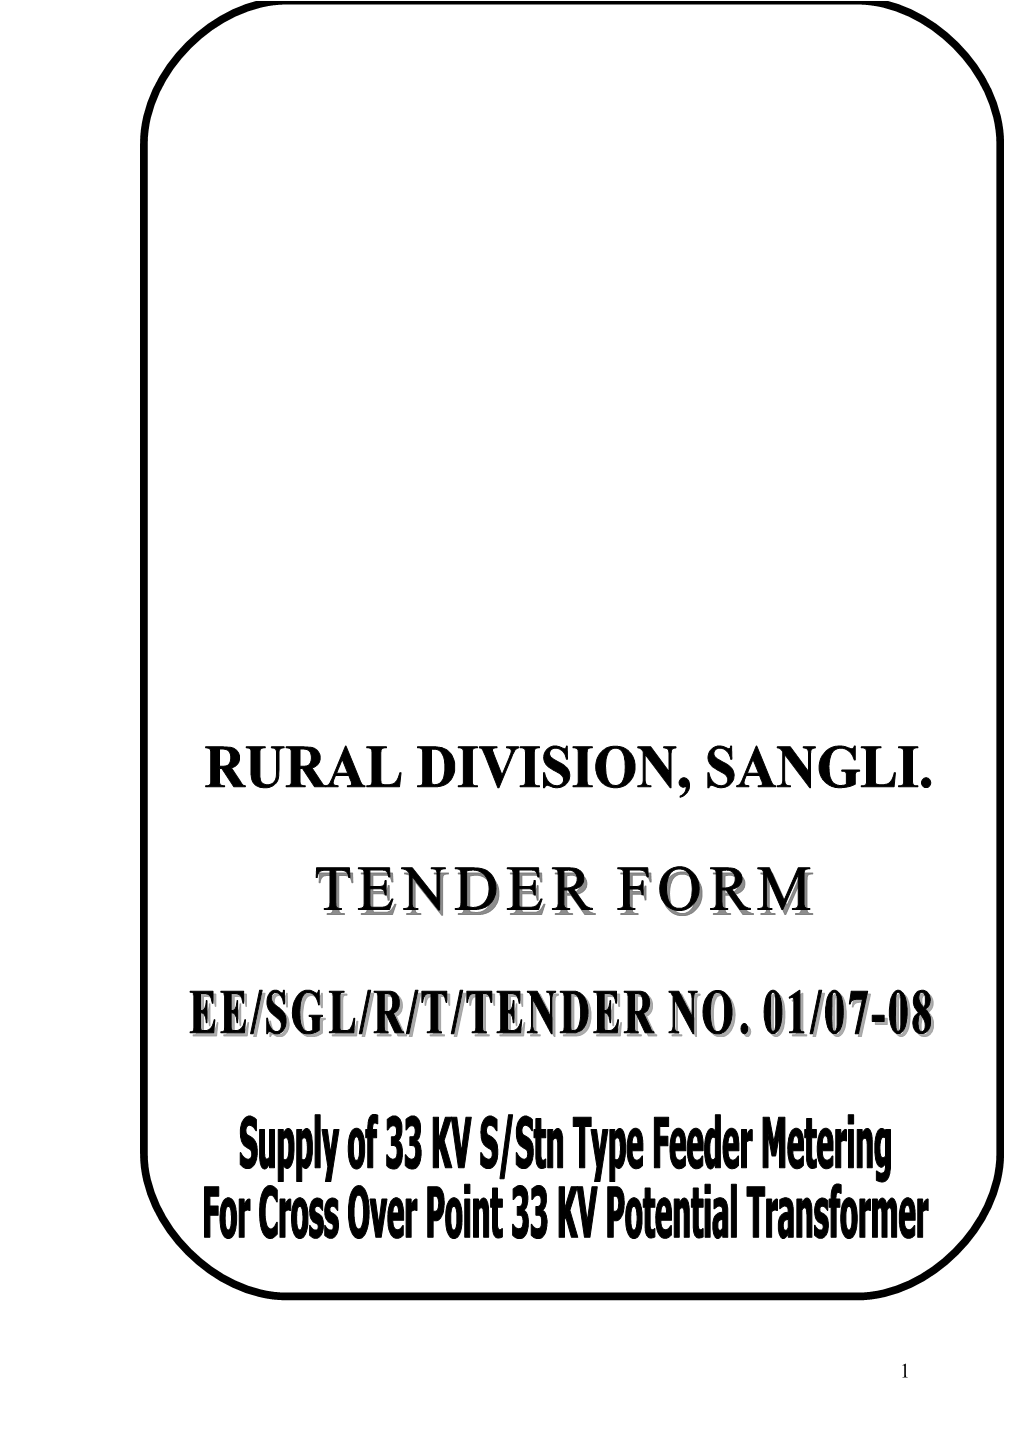 NAME of Worksupply of 33 KV CT for Rural Division Sangli